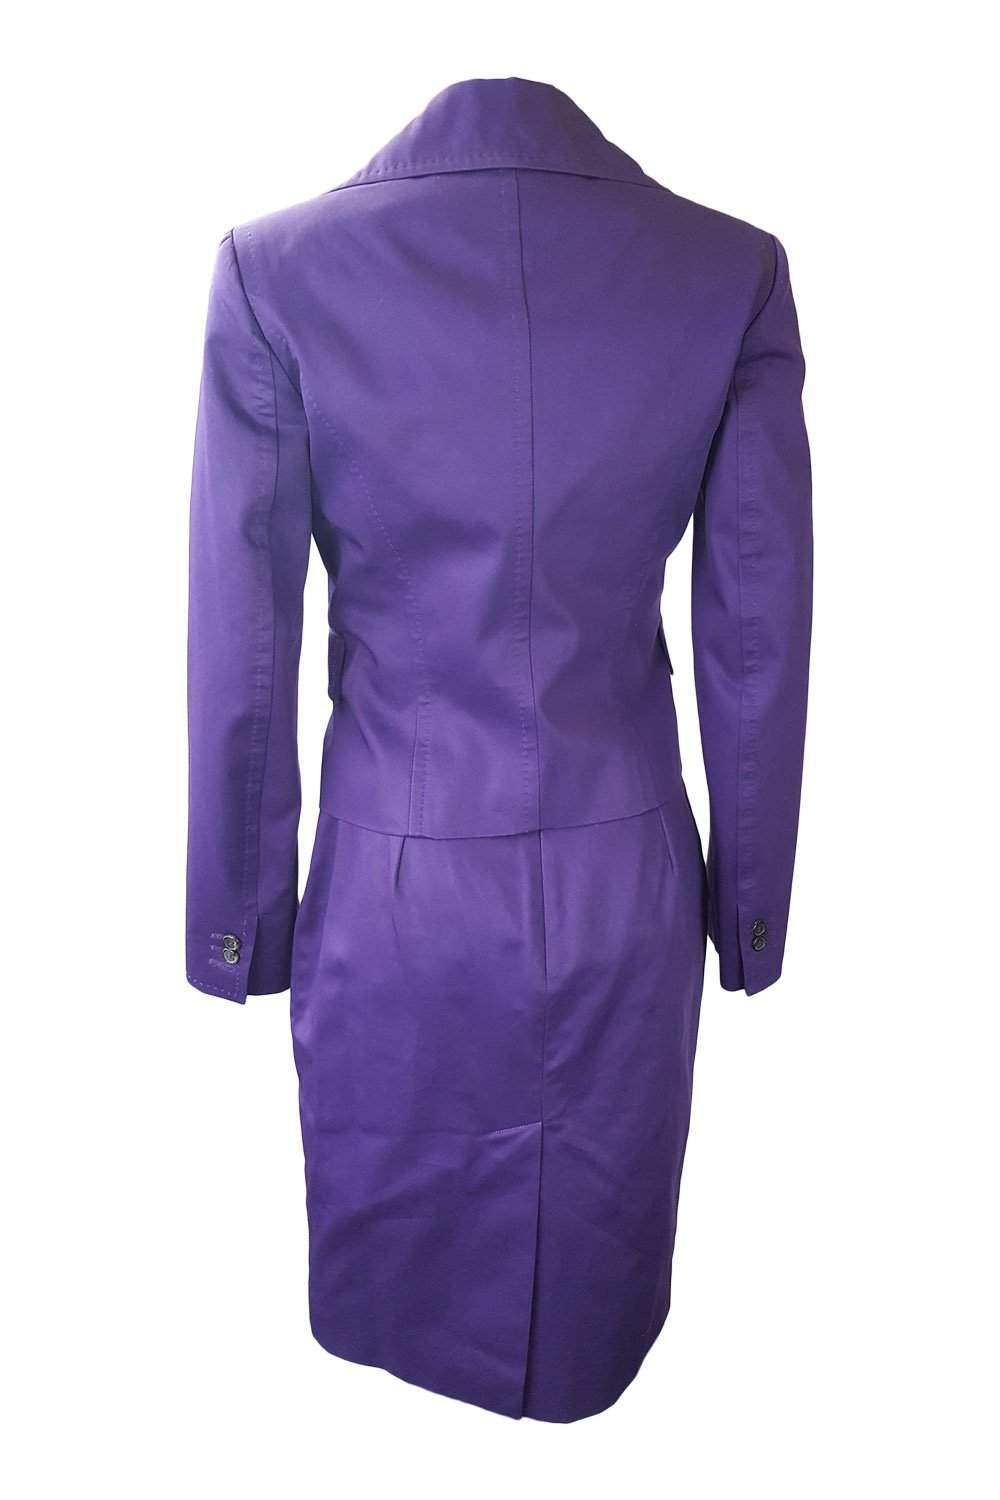 DSQUARED2 Purple Cotton Tailored Two Piece Skirt Suit (42)-DSquared2-The Freperie